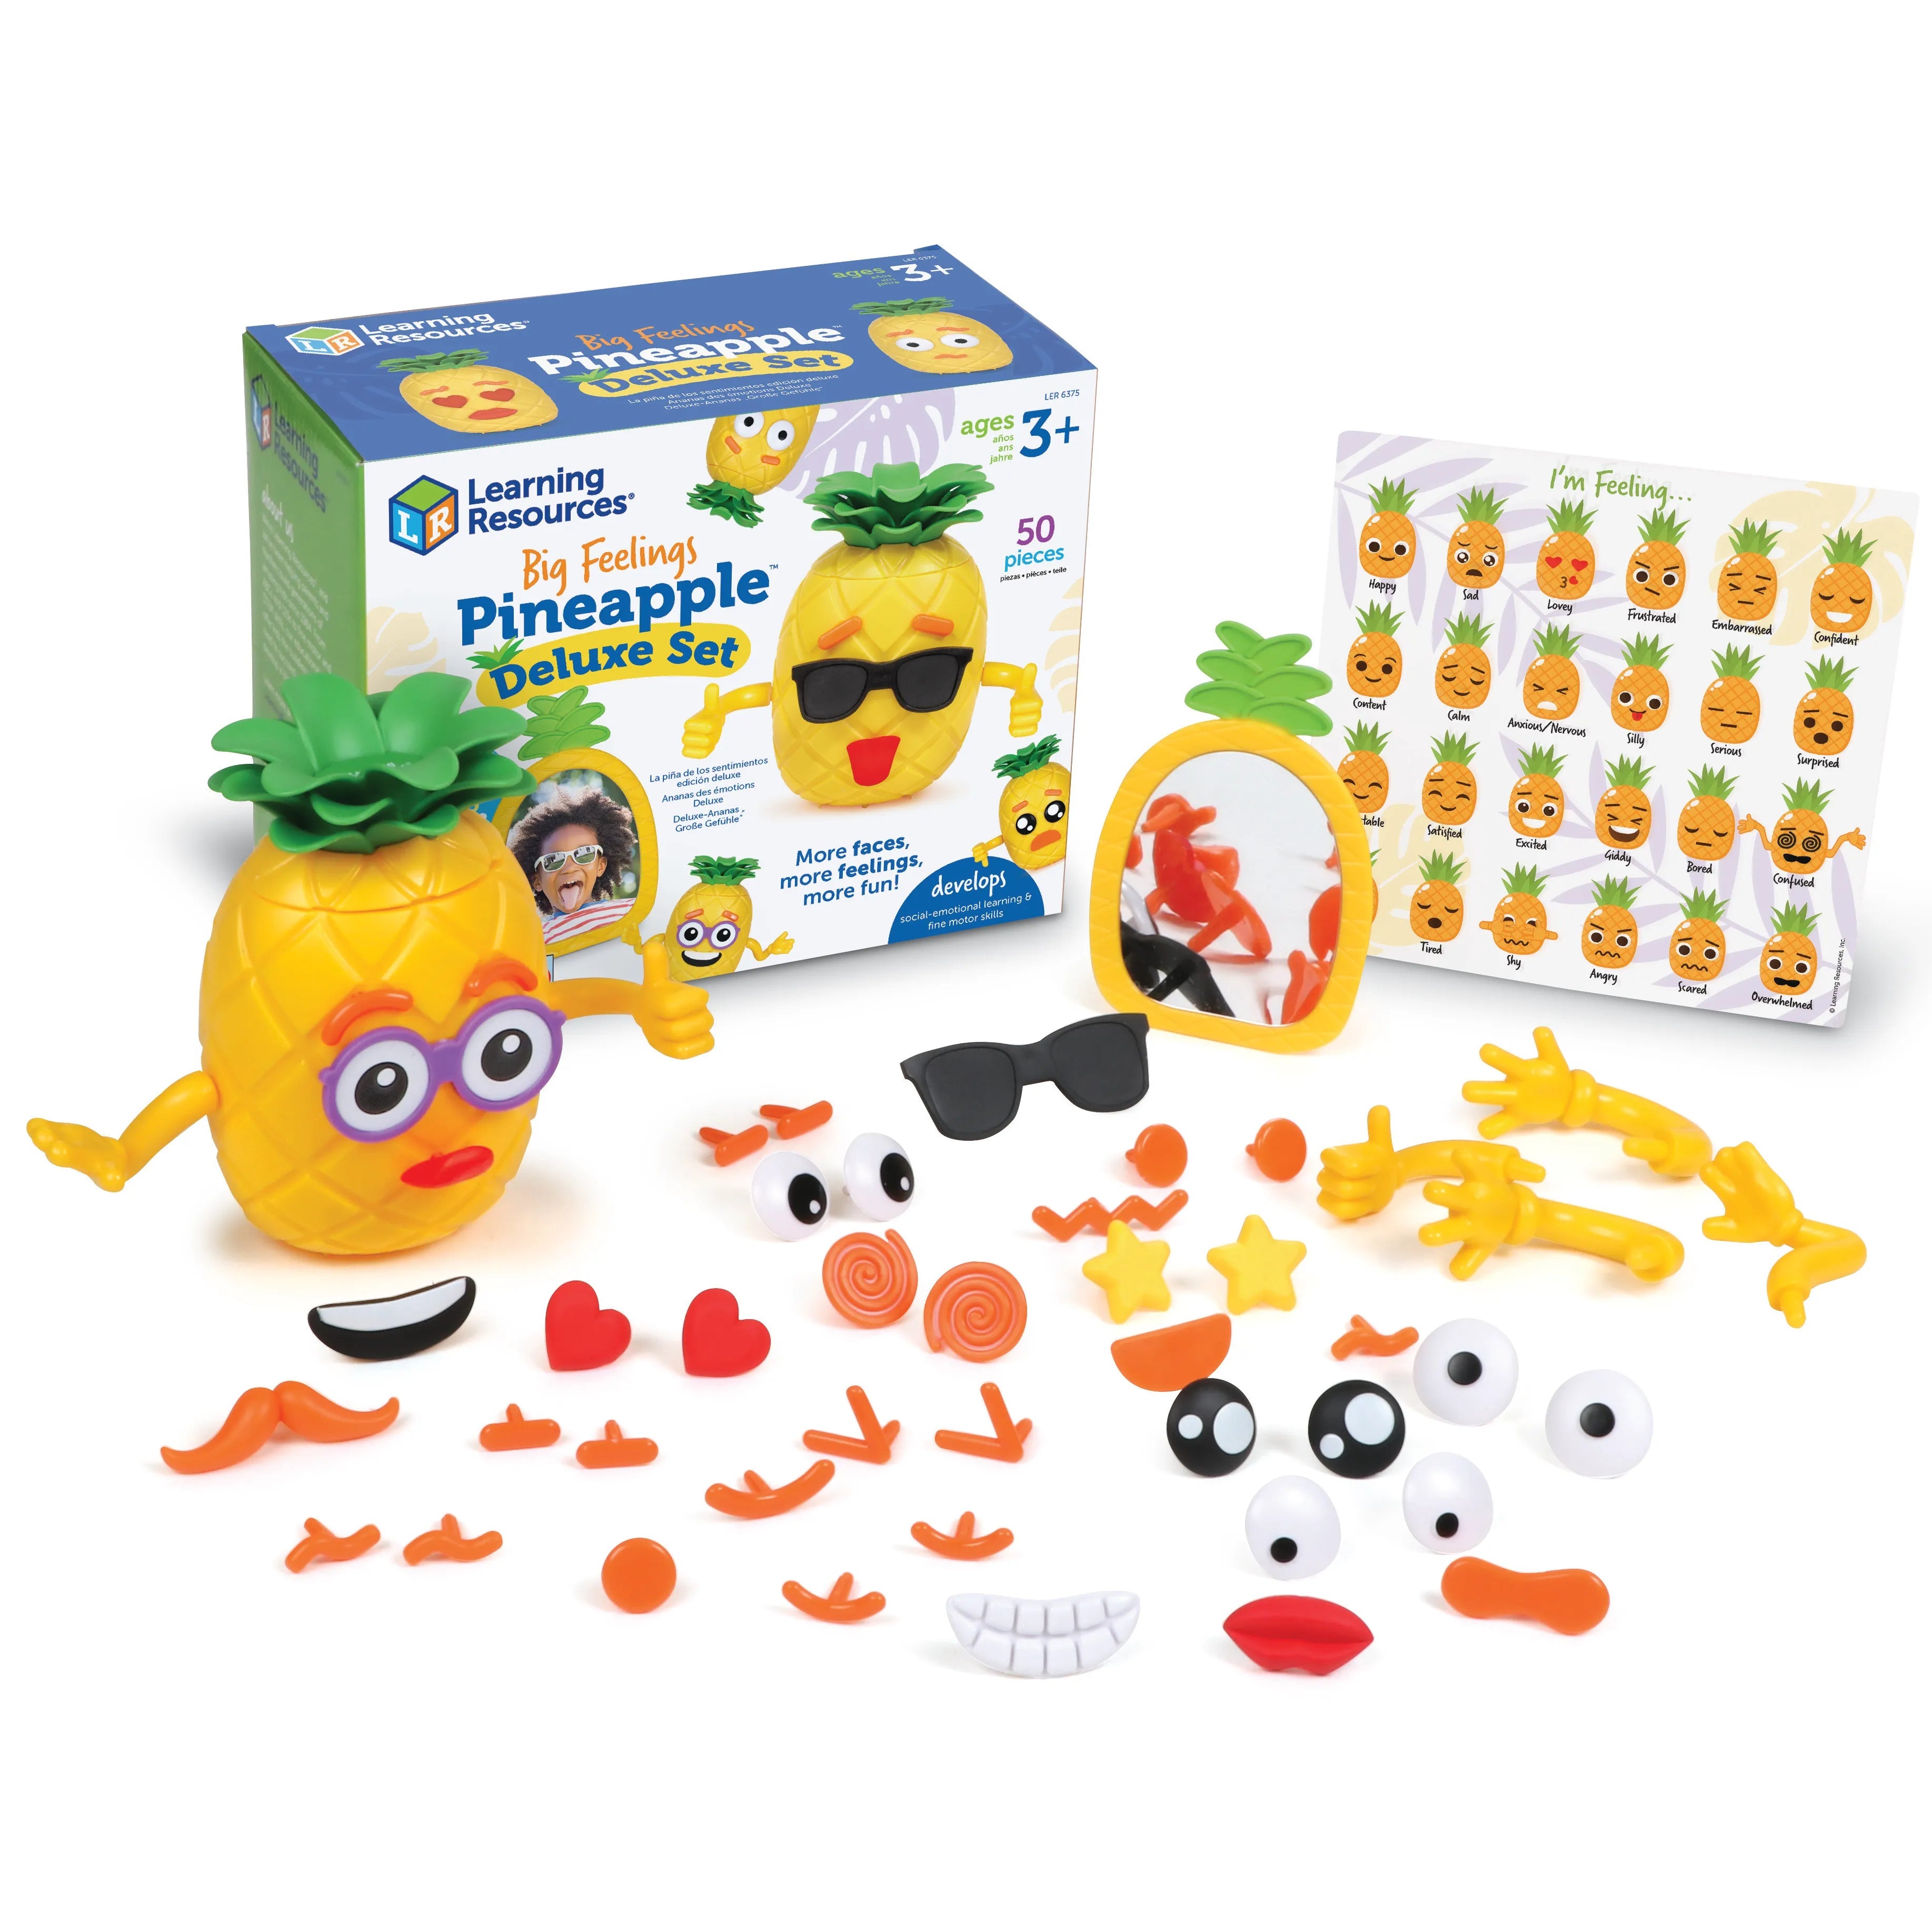 Learning Resources New Sprouts Deluxe Market Set by Learning Resources